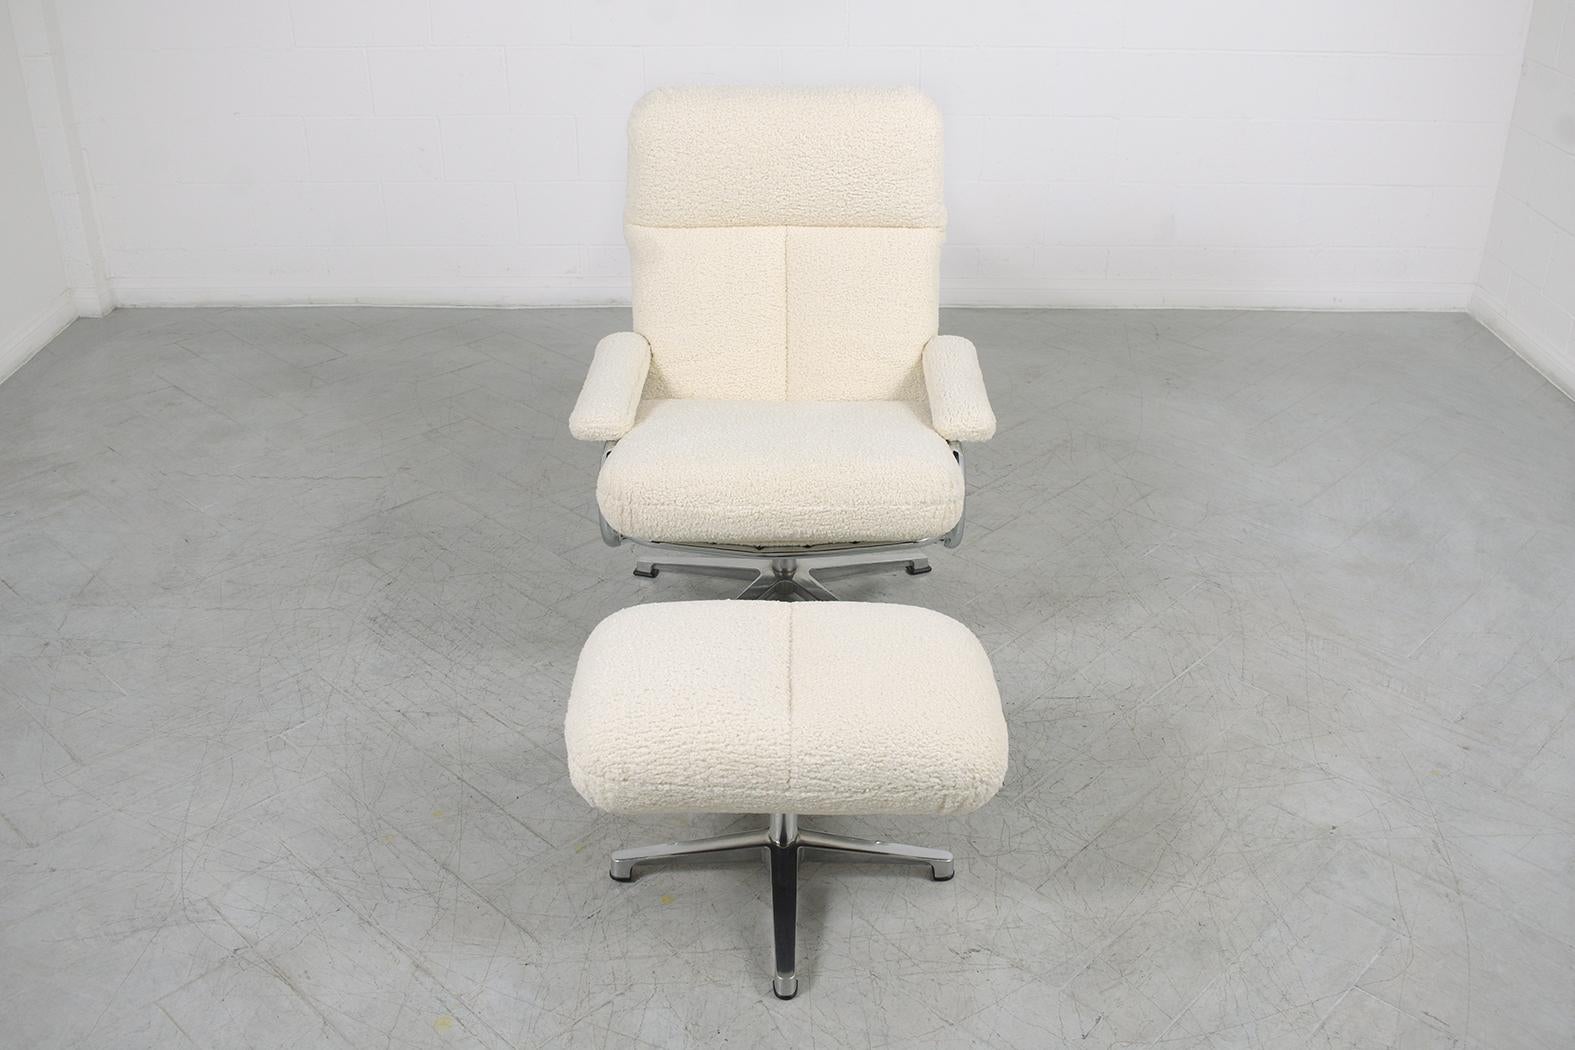 1970s Chrome-Plated Recliner Chair and Ottoman Set with Bouclé Upholstery 1